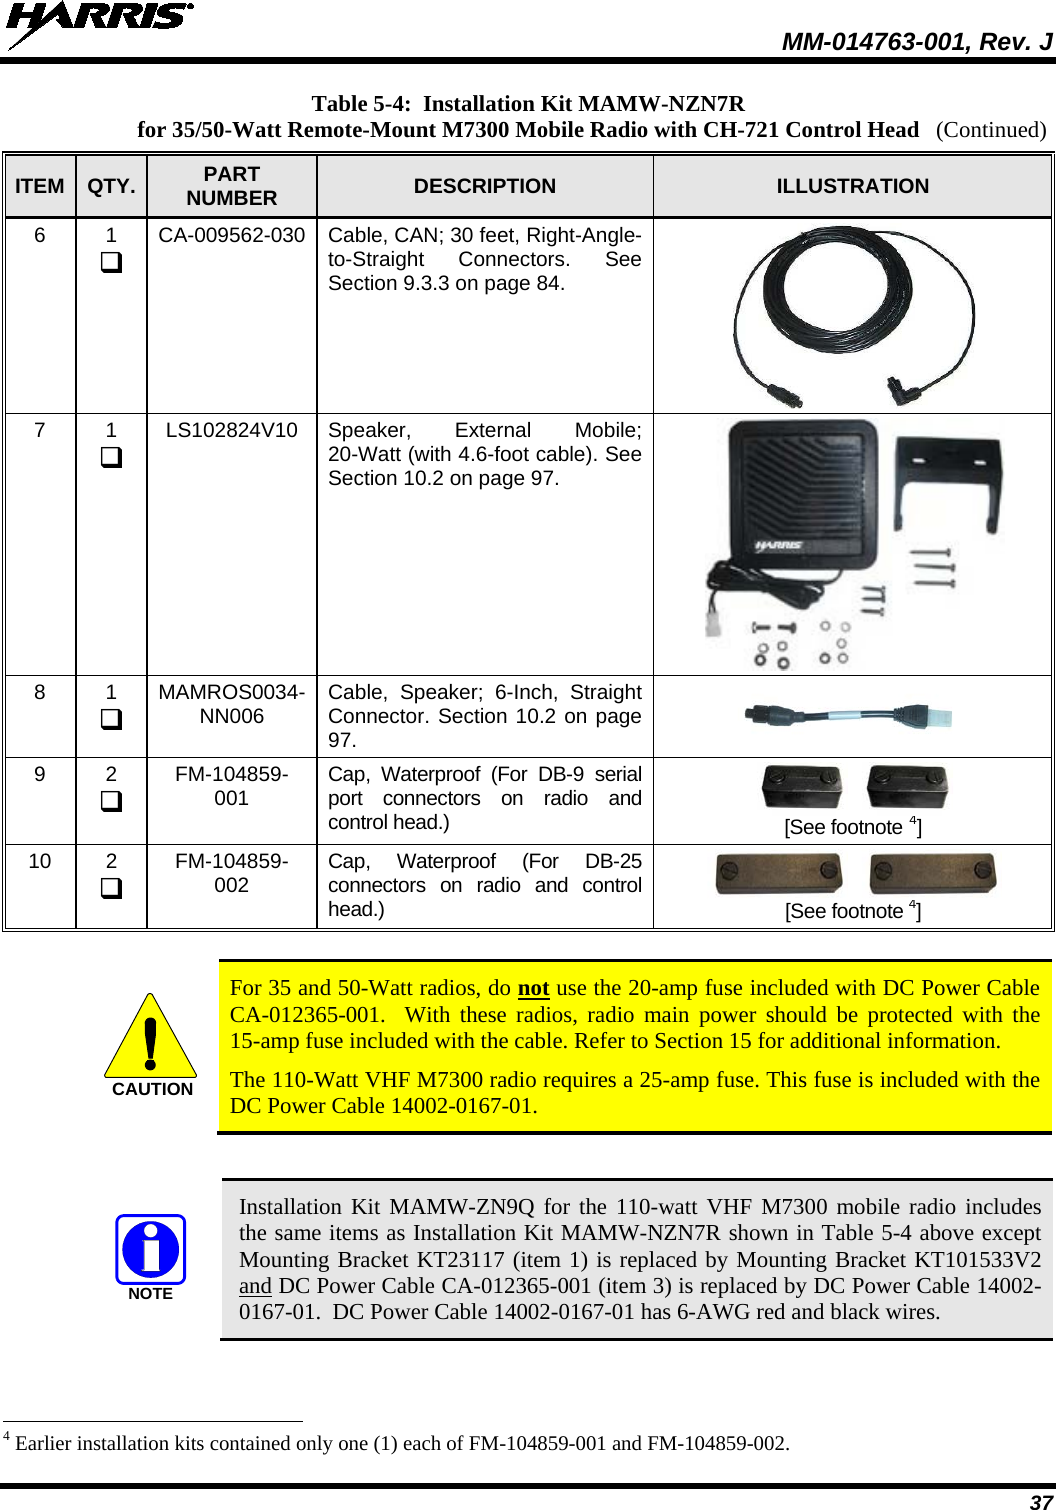  MM-014763-001, Rev. J 37 Table 5-4:  Installation Kit MAMW-NZN7R for 35/50-Watt Remote-Mount M7300 Mobile Radio with CH-721 Control Head ITEM QTY. PART NUMBER DESCRIPTION  ILLUSTRATION 6  1  CA-009562-030 Cable, CAN; 30 feet, Right-Angle-to-Straight Connectors. See Section 9.3.3 on page 84.  7  1  LS102824V10 Speaker, External Mobile; 20-Watt (with 4.6-foot cable). See Section 10.2 on page 97.  8  1  MAMROS0034-NN006 Cable, Speaker; 6-Inch, Straight Connector. Section 10.2 on page 97.  9  2  FM-104859-001 Cap, Waterproof (For DB-9 serial port connectors on radio and control head.)       [See footnote 4] 10 2  FM-104859-002 Cap, Waterproof (For DB-25 connectors on radio and control head.)       [See footnote 4]   For 35 and 50-Watt radios, do not use the 20-amp fuse included with DC Power Cable CA-012365-001.  With these radios, radio main power should be protected with the 15-amp fuse included with the cable. Refer to Section 15 for additional information. The 110-Watt VHF M7300 radio requires a 25-amp fuse. This fuse is included with the DC Power Cable 14002-0167-01.     Installation Kit MAMW-ZN9Q for the 110-watt VHF M7300 mobile radio includes the same items as Installation Kit MAMW-NZN7R shown in Table 5-4 above except Mounting Bracket KT23117 (item 1) is replaced by Mounting Bracket KT101533V2 and DC Power Cable CA-012365-001 (item 3) is replaced by DC Power Cable 14002-0167-01.  DC Power Cable 14002-0167-01 has 6-AWG red and black wires.                                                             4 Earlier installation kits contained only one (1) each of FM-104859-001 and FM-104859-002. CAUTIONNOTE (Continued) 